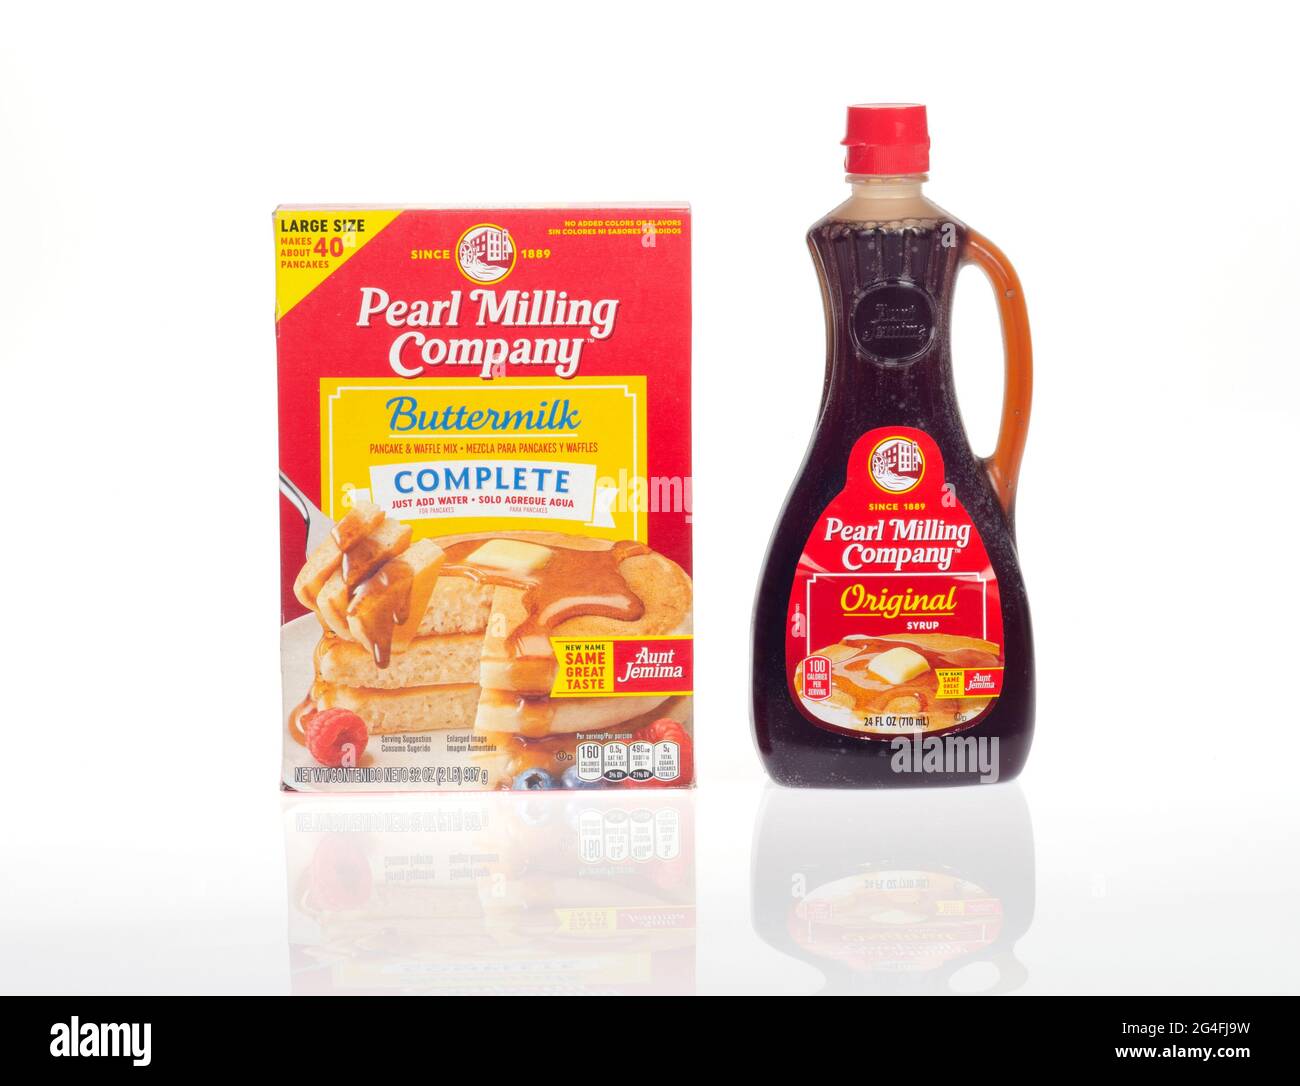 Pearl Milling, new identity for Aunt Jemima,  Original Syrup Bottle and Buttermilk Complete Pancake Mix Box Stock Photo